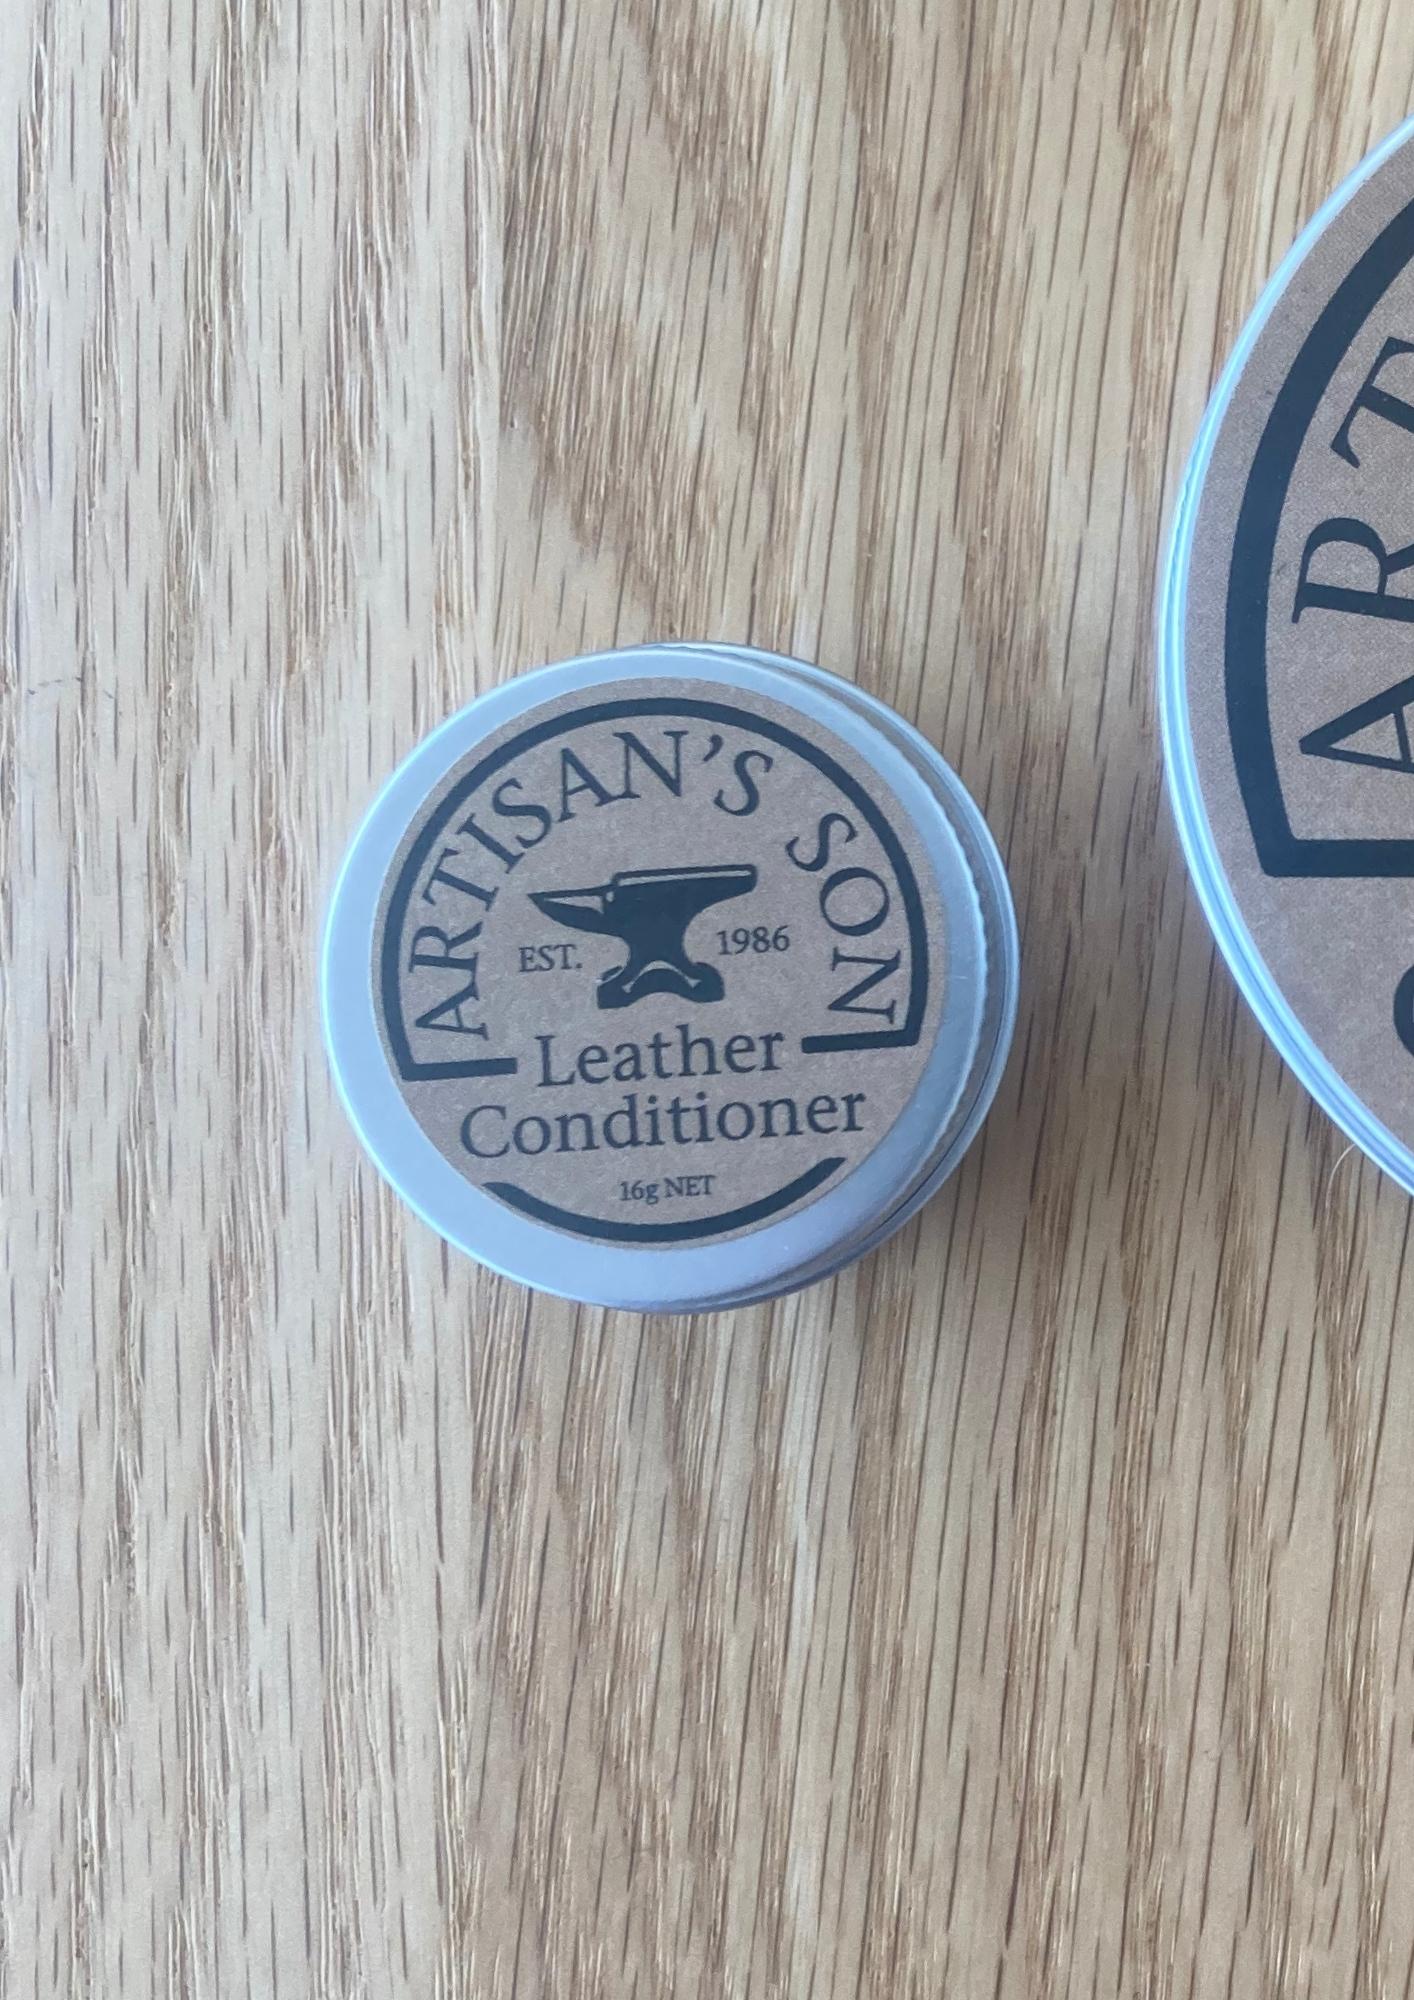 Artisan's Son Premium Wax Blend - Leather Conditioner - Koi Knives